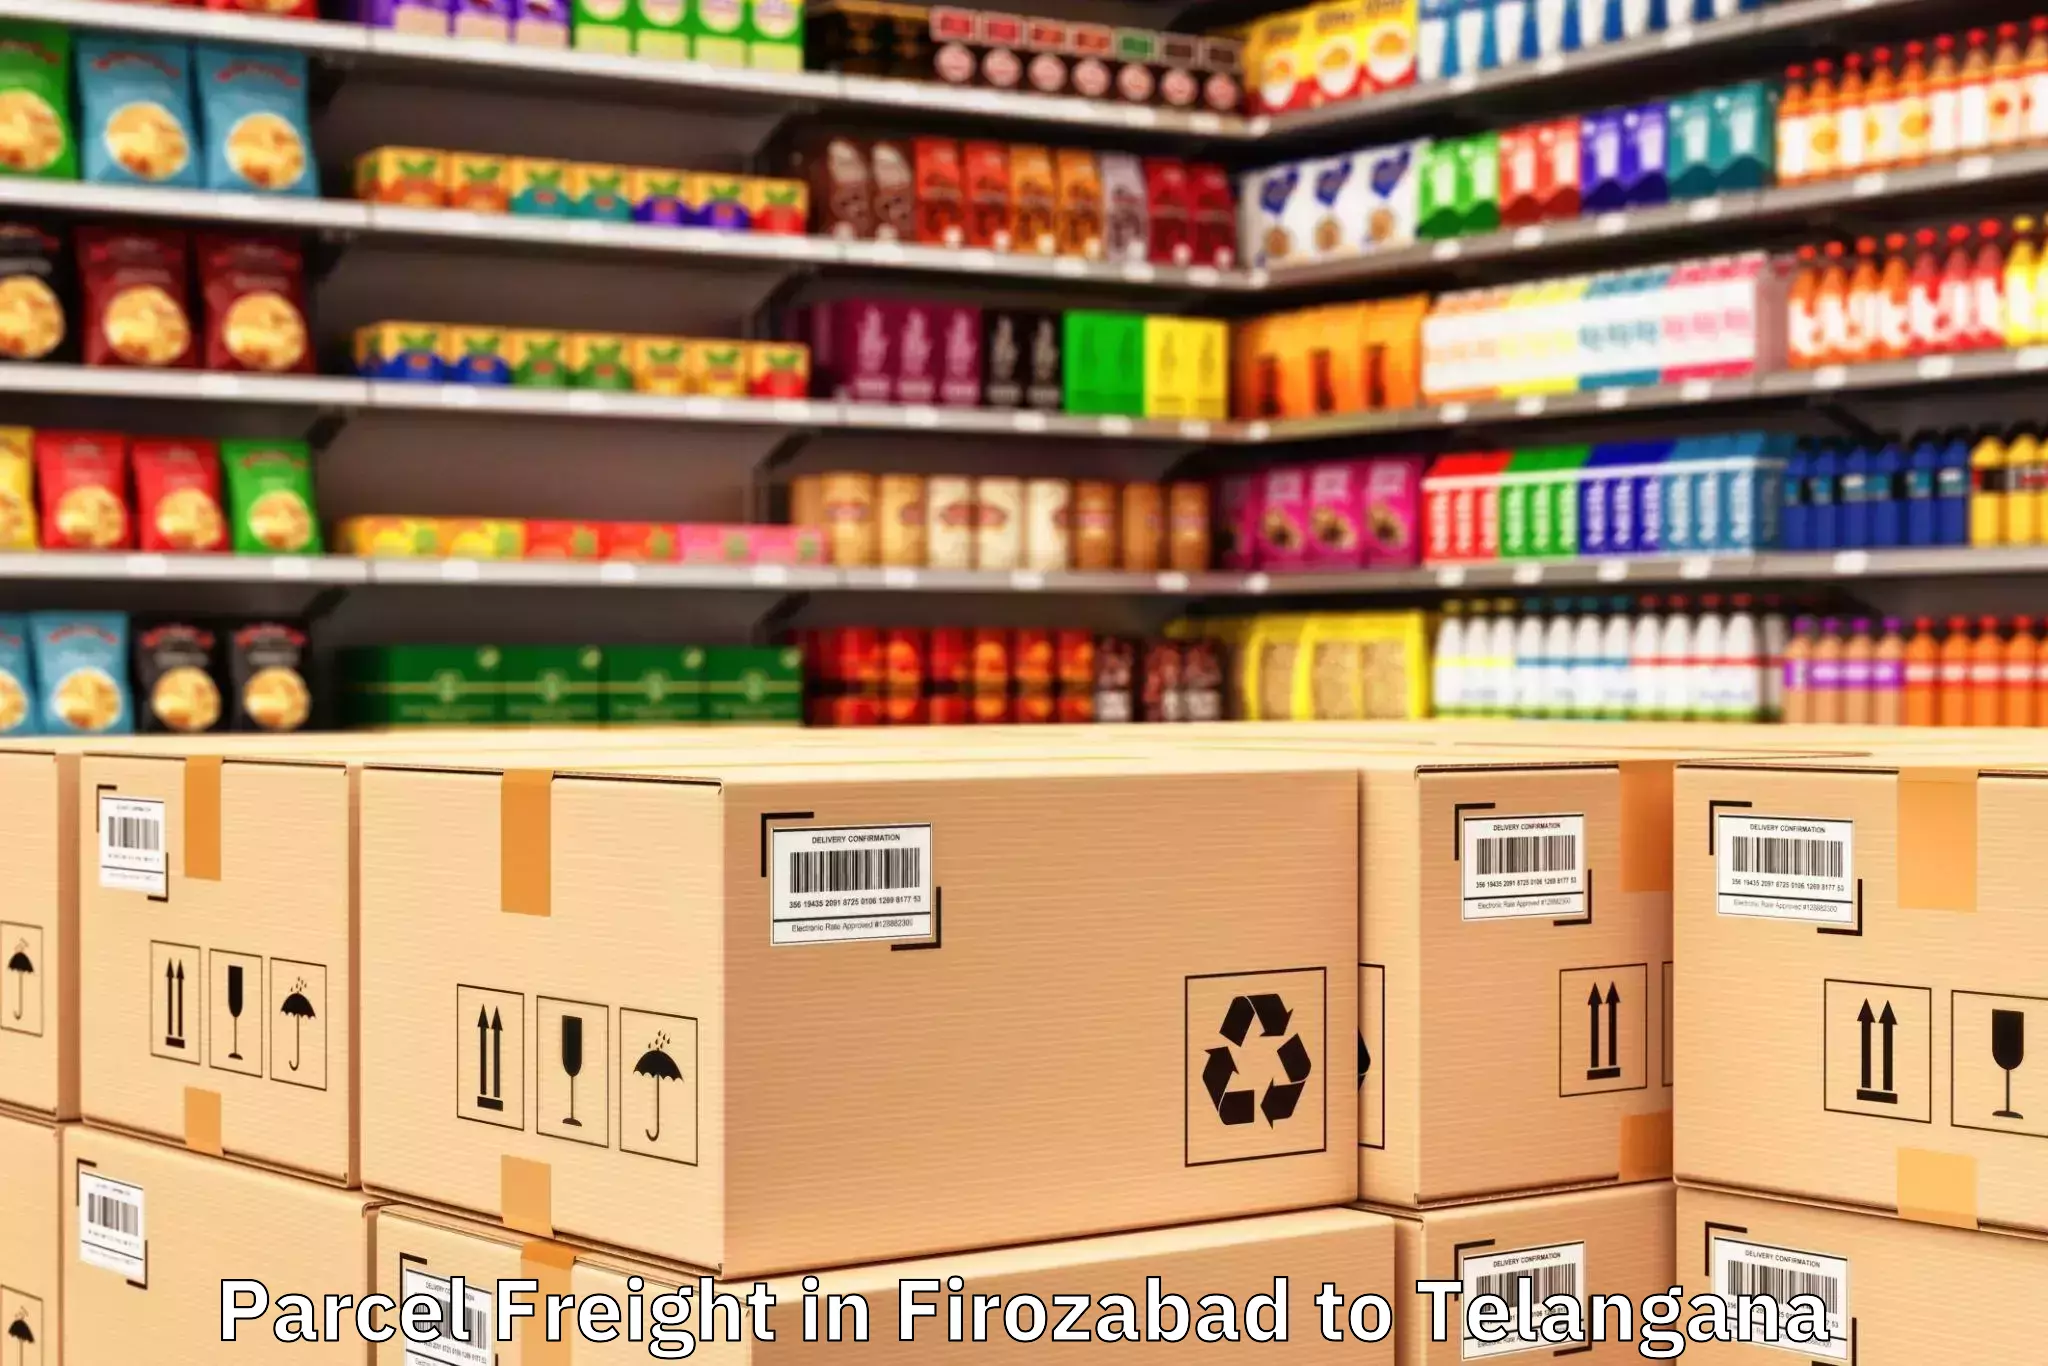 Comprehensive Firozabad to Metpally Parcel Freight